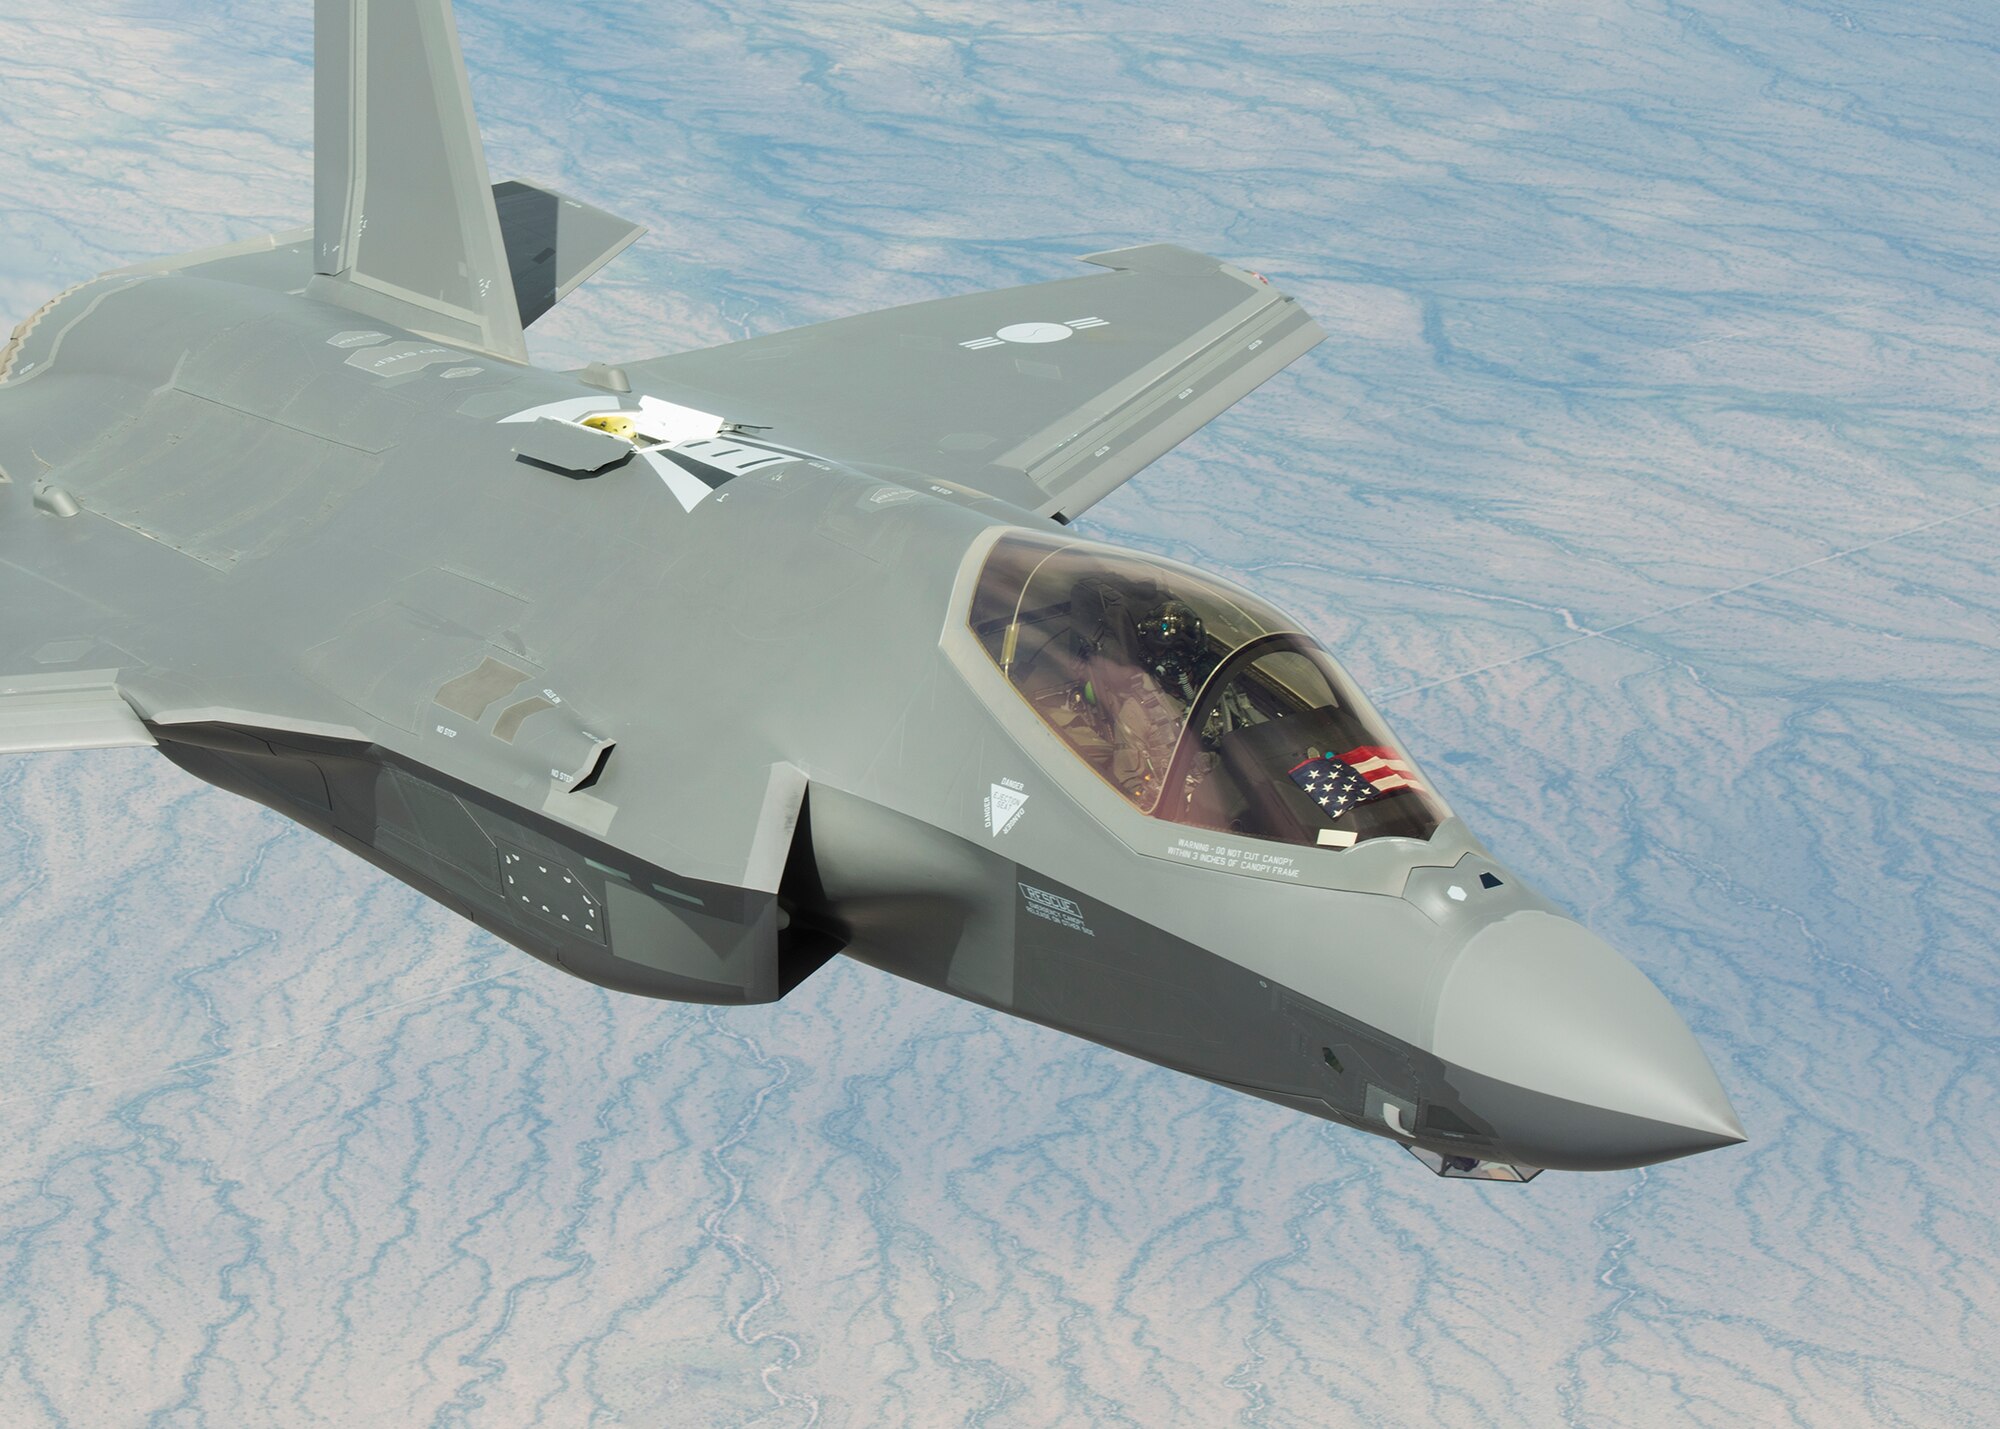 A Republic of Korea Air Force, F-35A Lightning II approaches a KC-135 to refuel March 15, 2019, in Ariz. The F-35’s engine produces 43,000 pounds of thrust and contains a 6-stage compressor, 3-stage fan, single stage high-pressure turbine, annular combustor and a 2-stage low-pressure turbine. (U.S. Air Force photo by Airman 1st Class Leala Marquez)